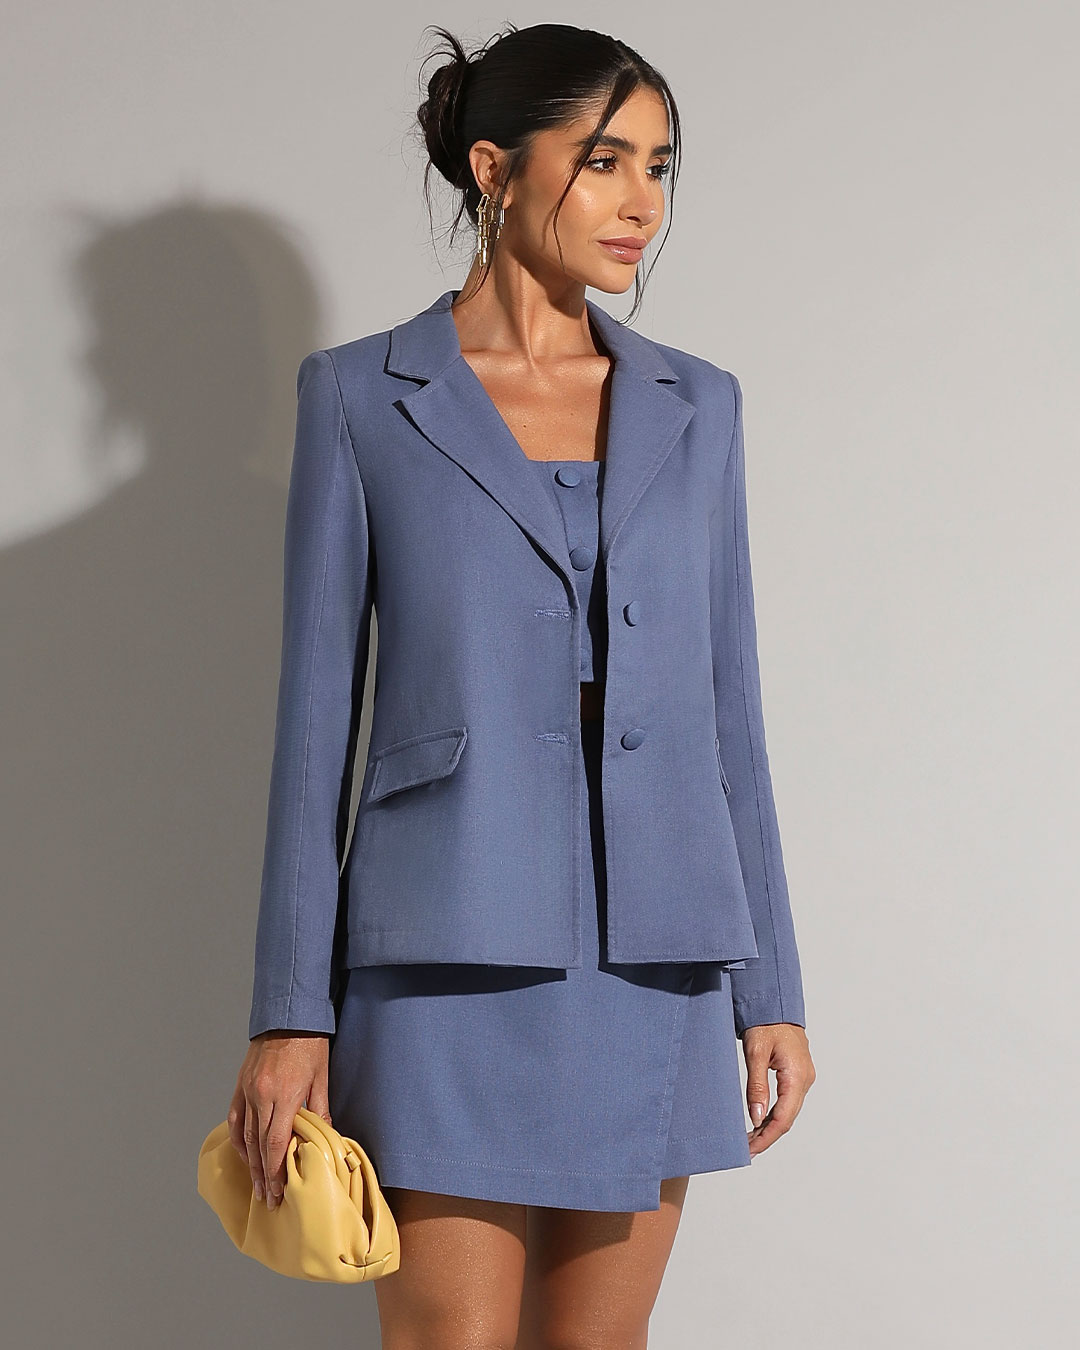 Miss Misses - Miss Misses Blazer With Shoulder Pads and Buttons Blue - 54206002